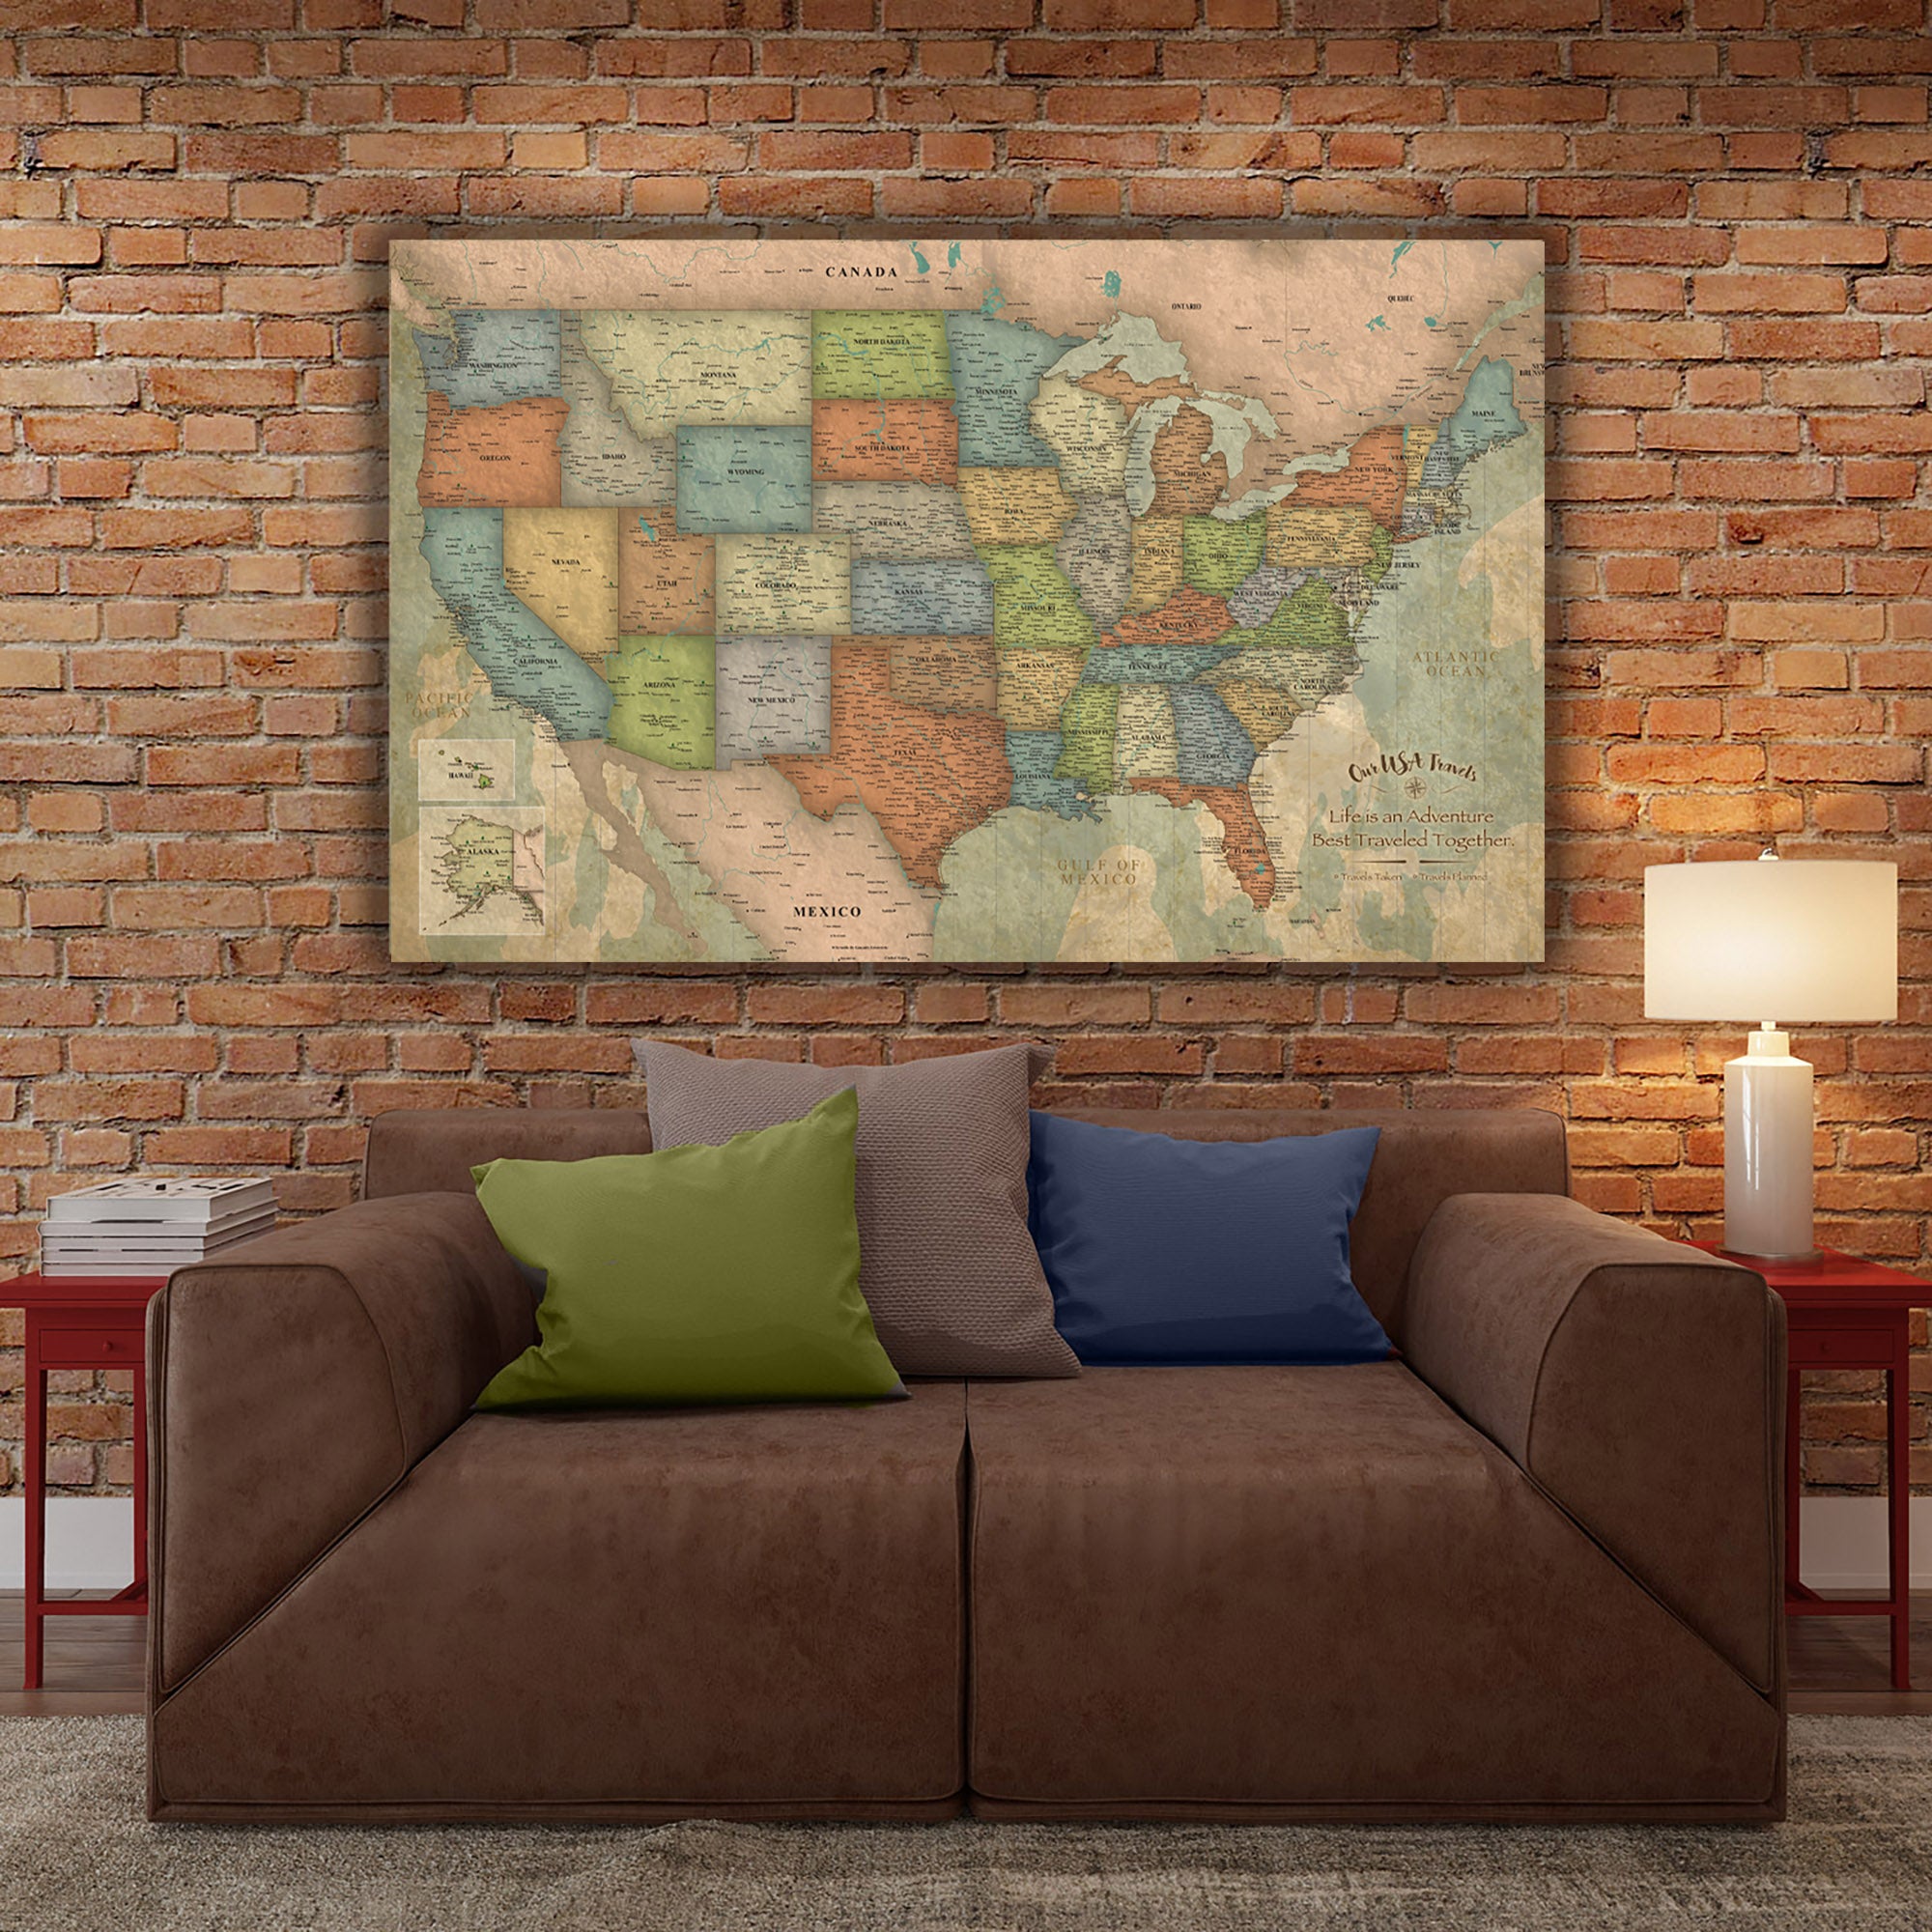  Holy Cow Canvas Personalized Push Pin World Map on